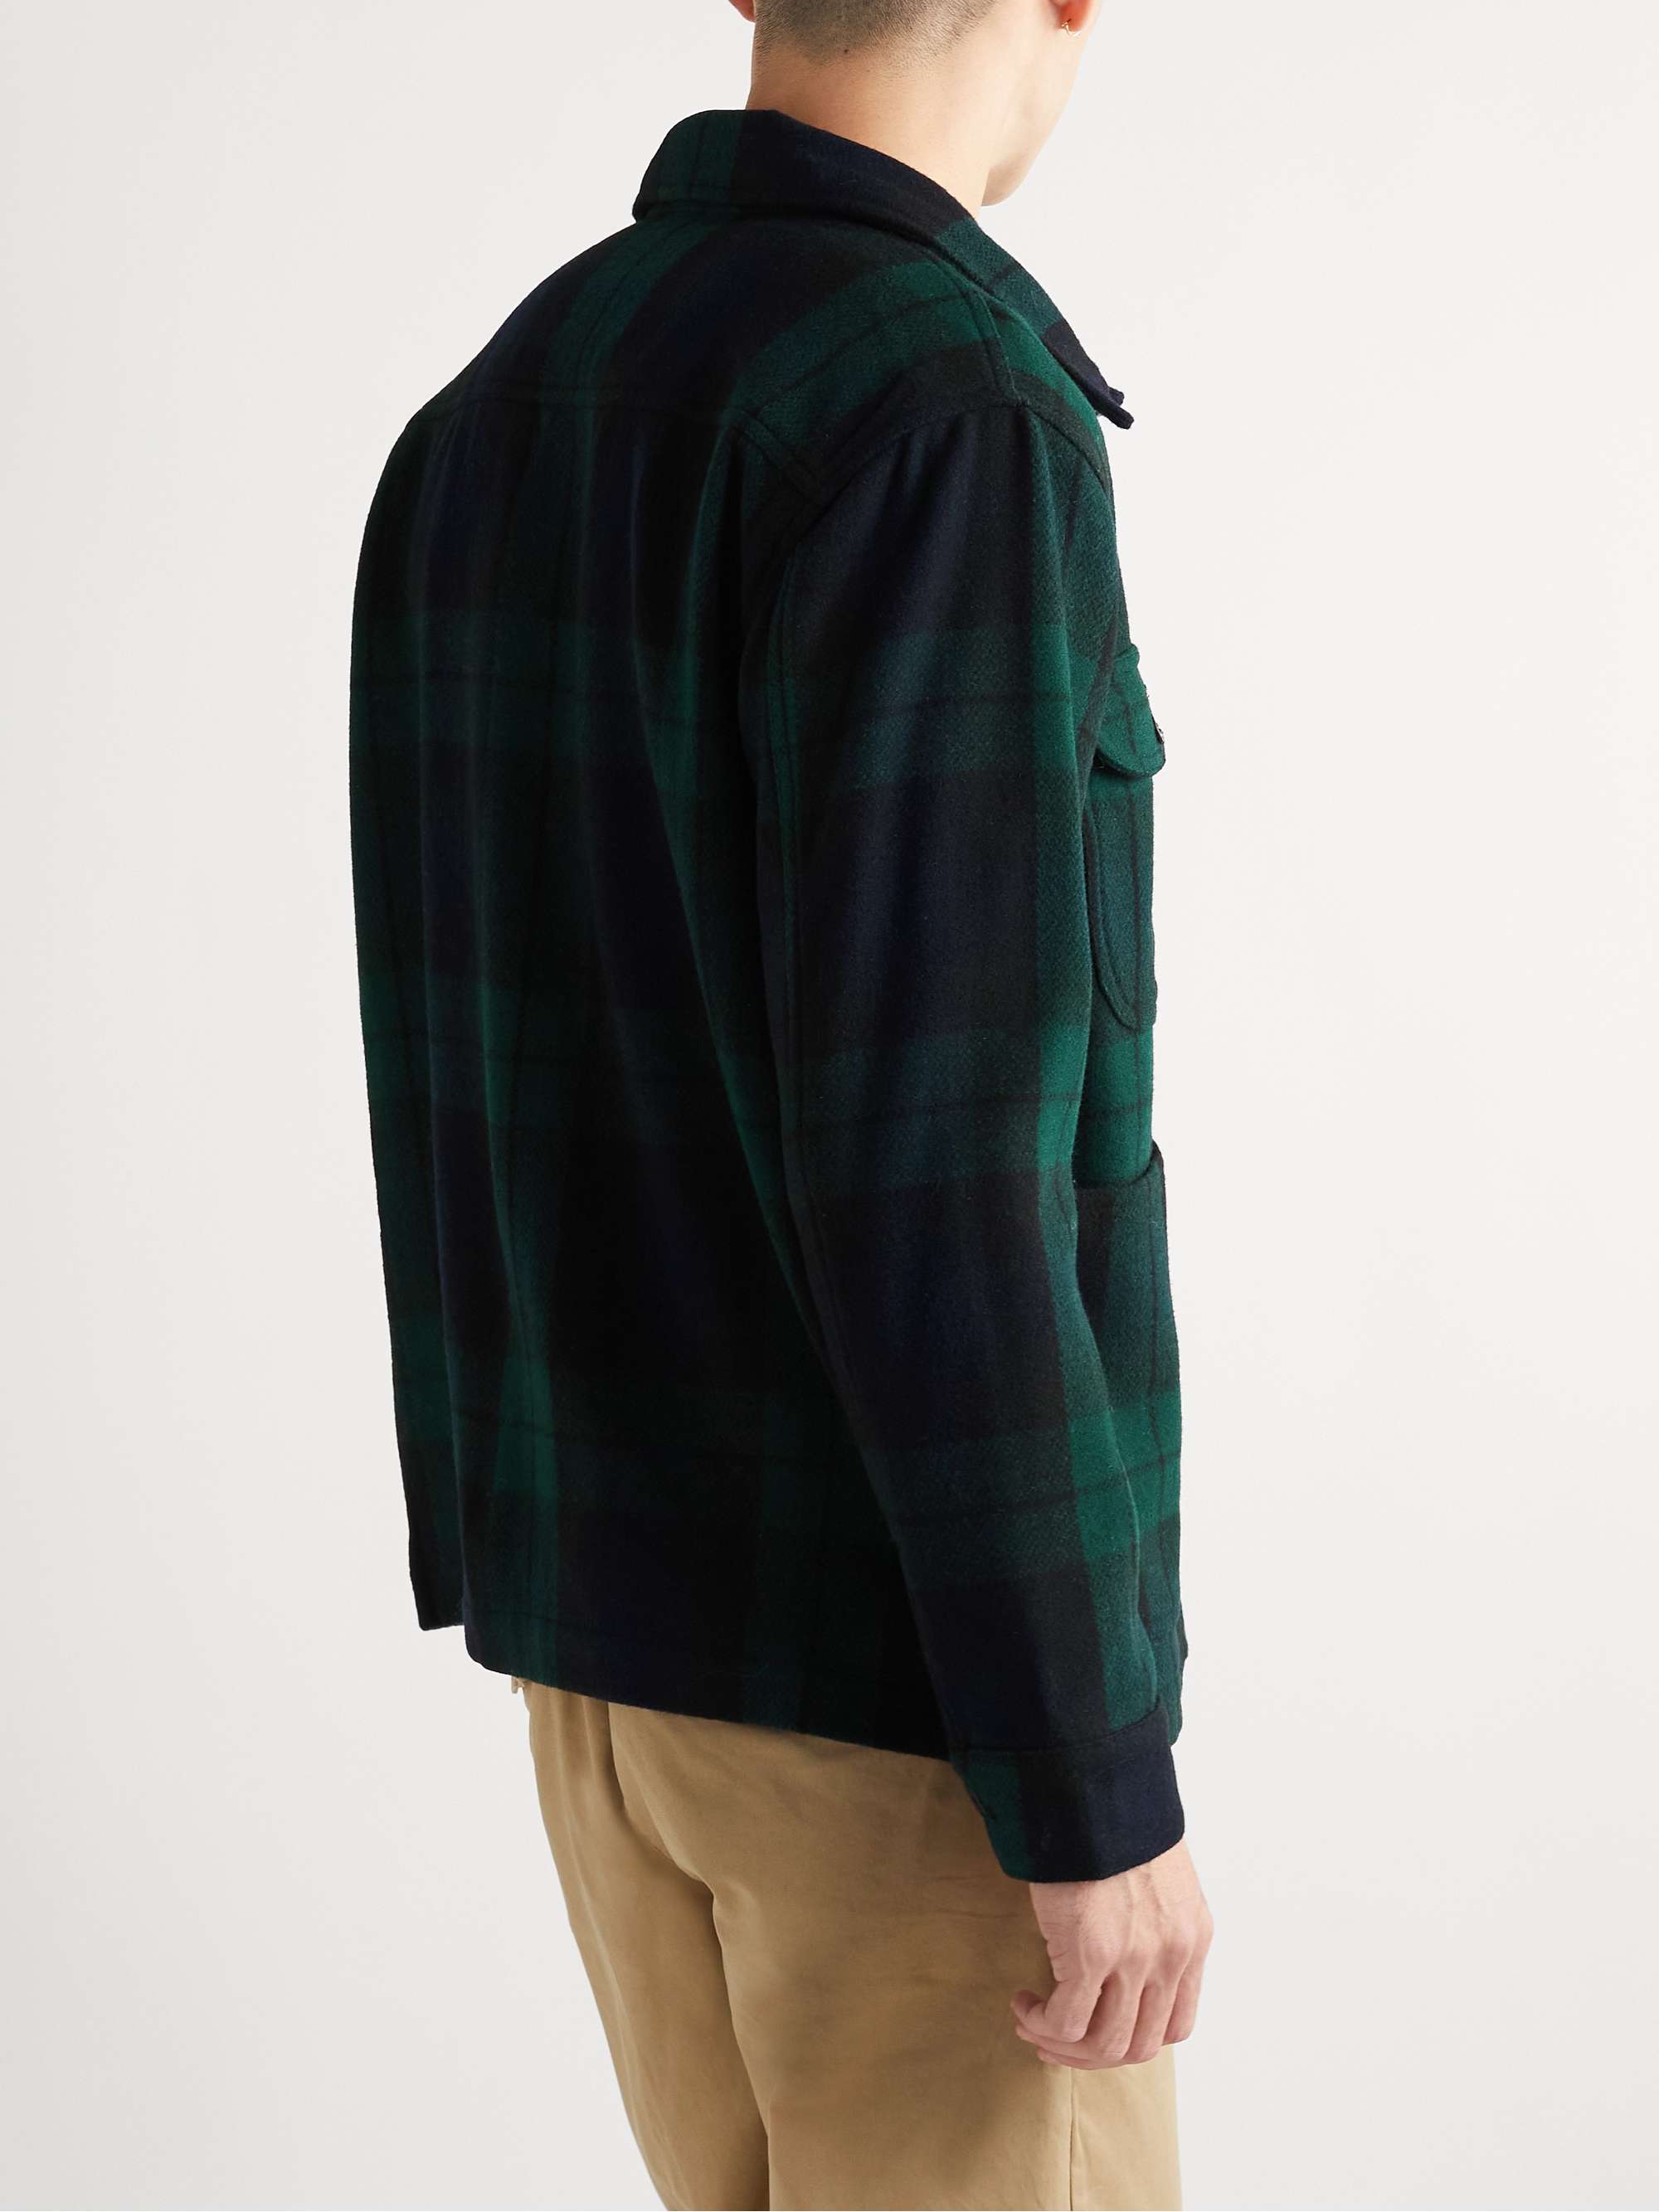 ALEX MILL Checked Wool Chore Jacket